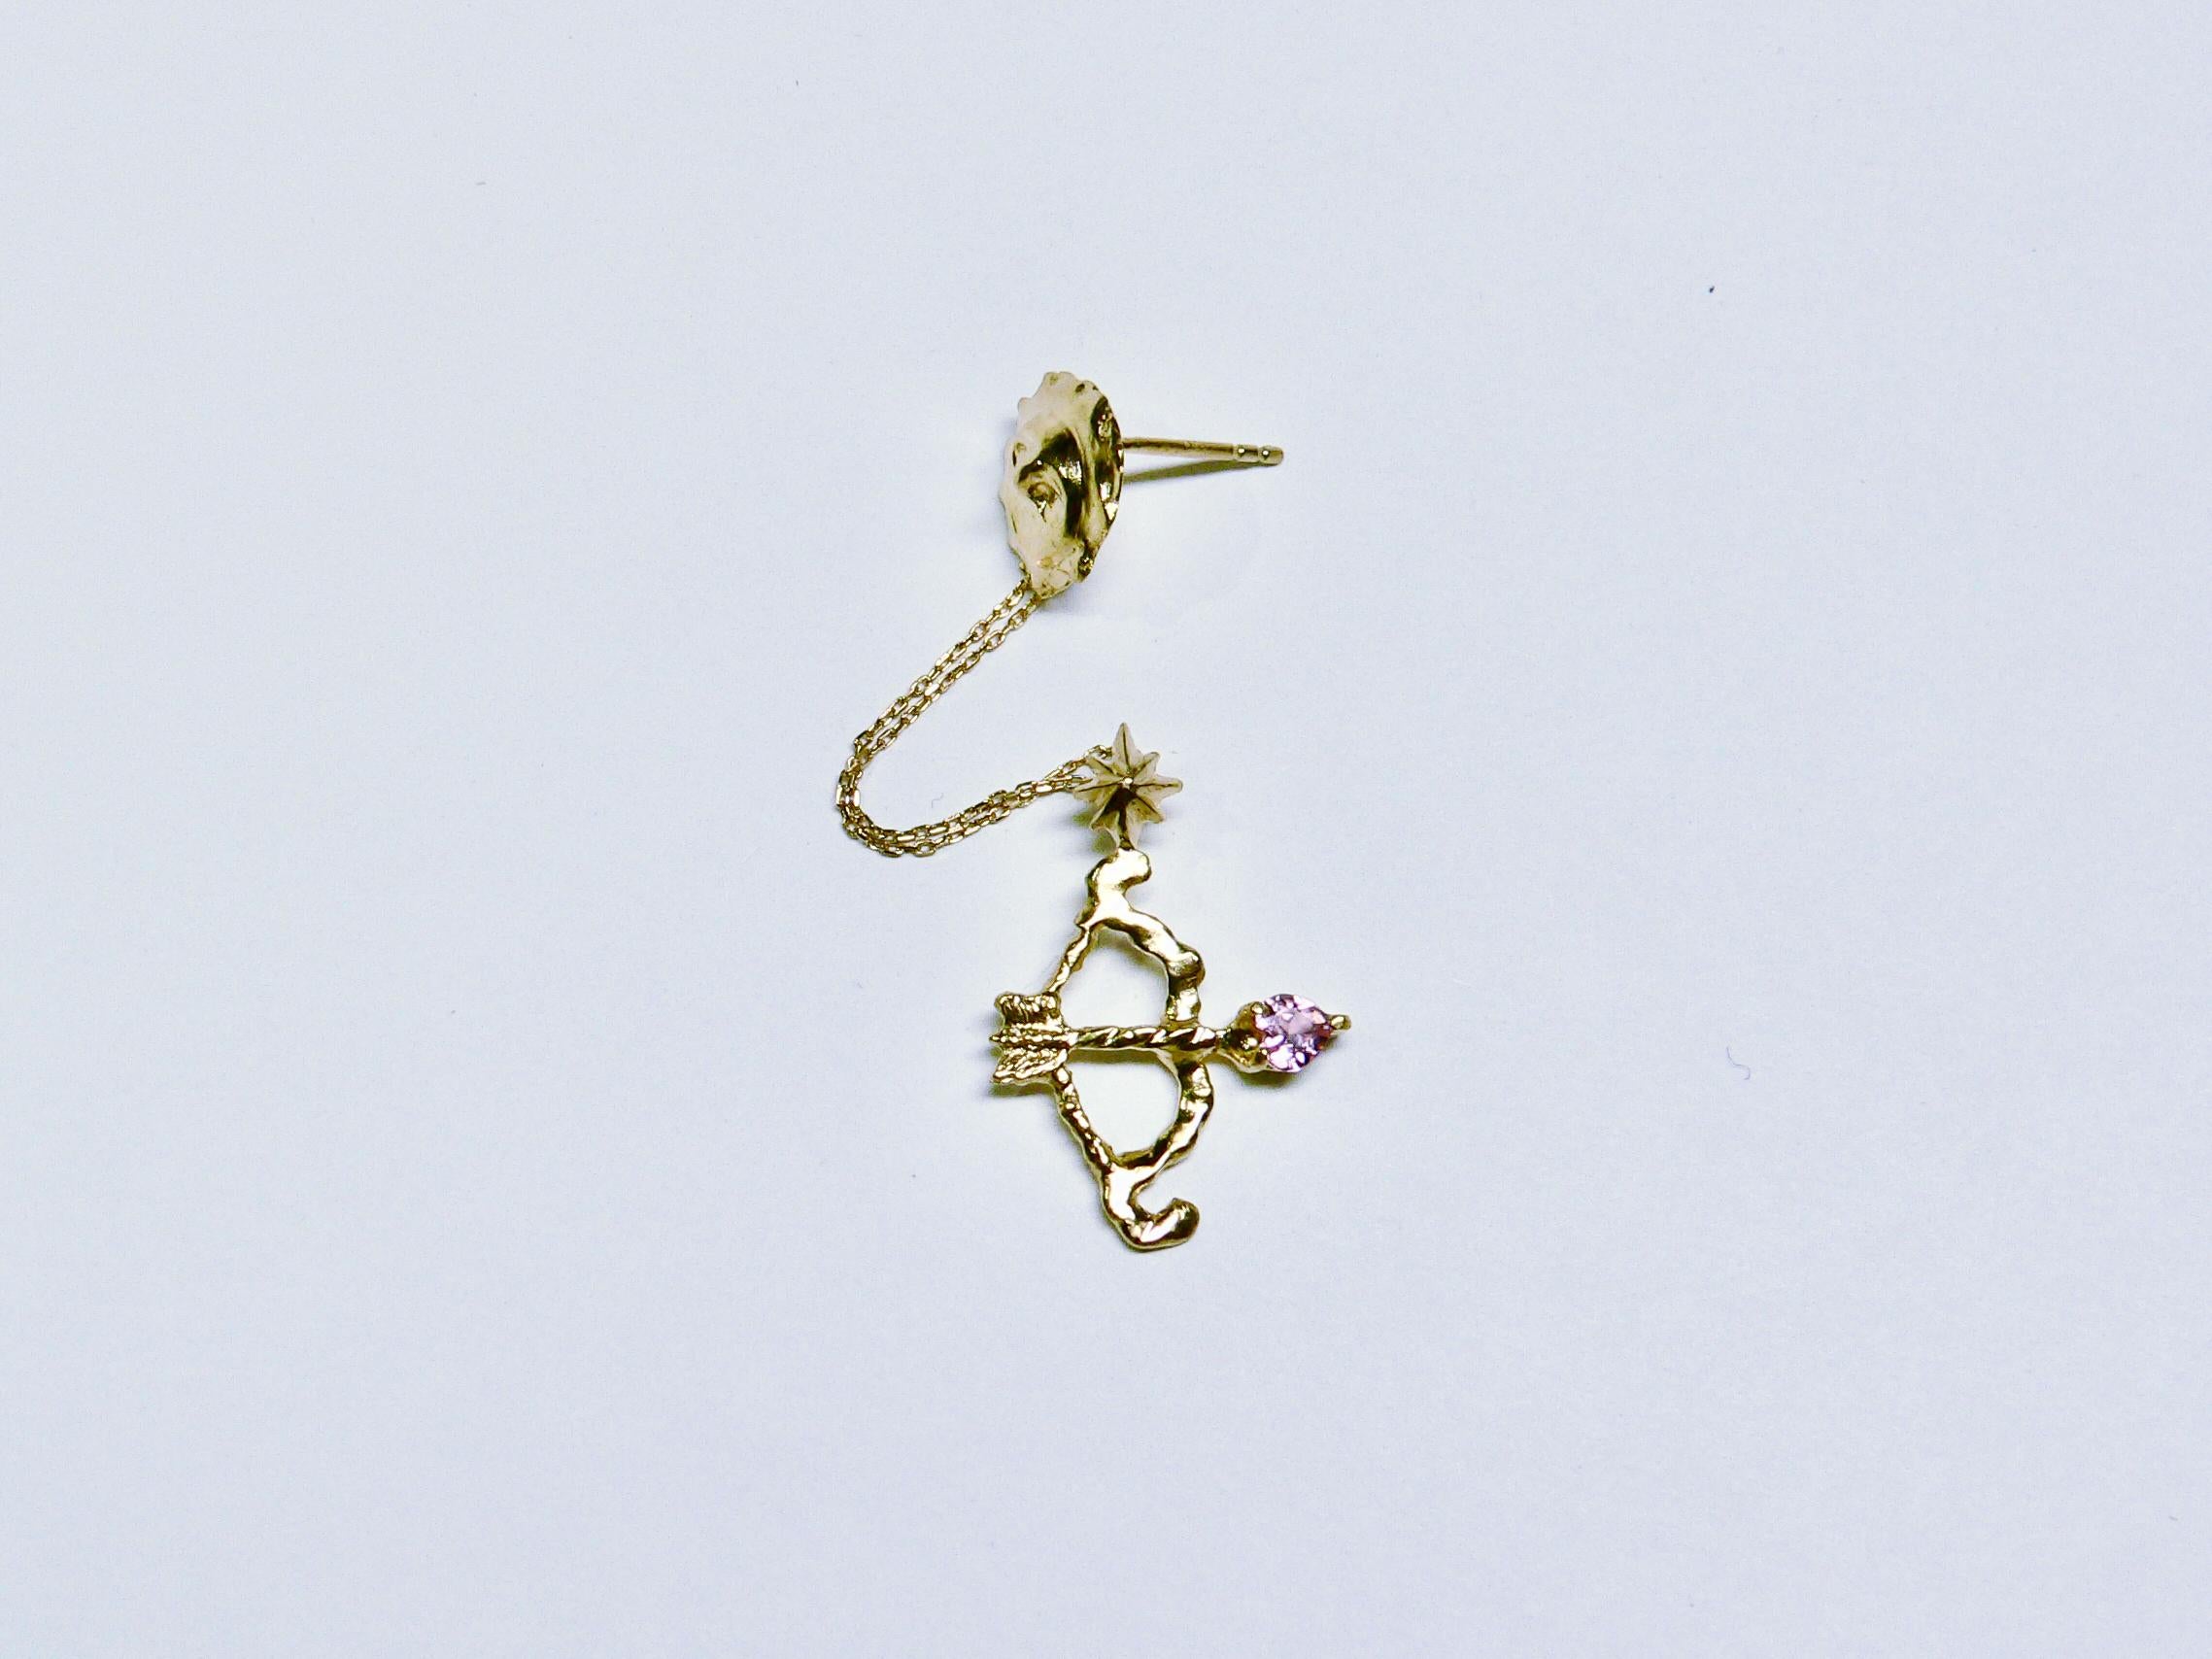 Artist Sunny Sun with Bow and Arrow Drop Single Earring, Gold-Plated Sterling Silver For Sale